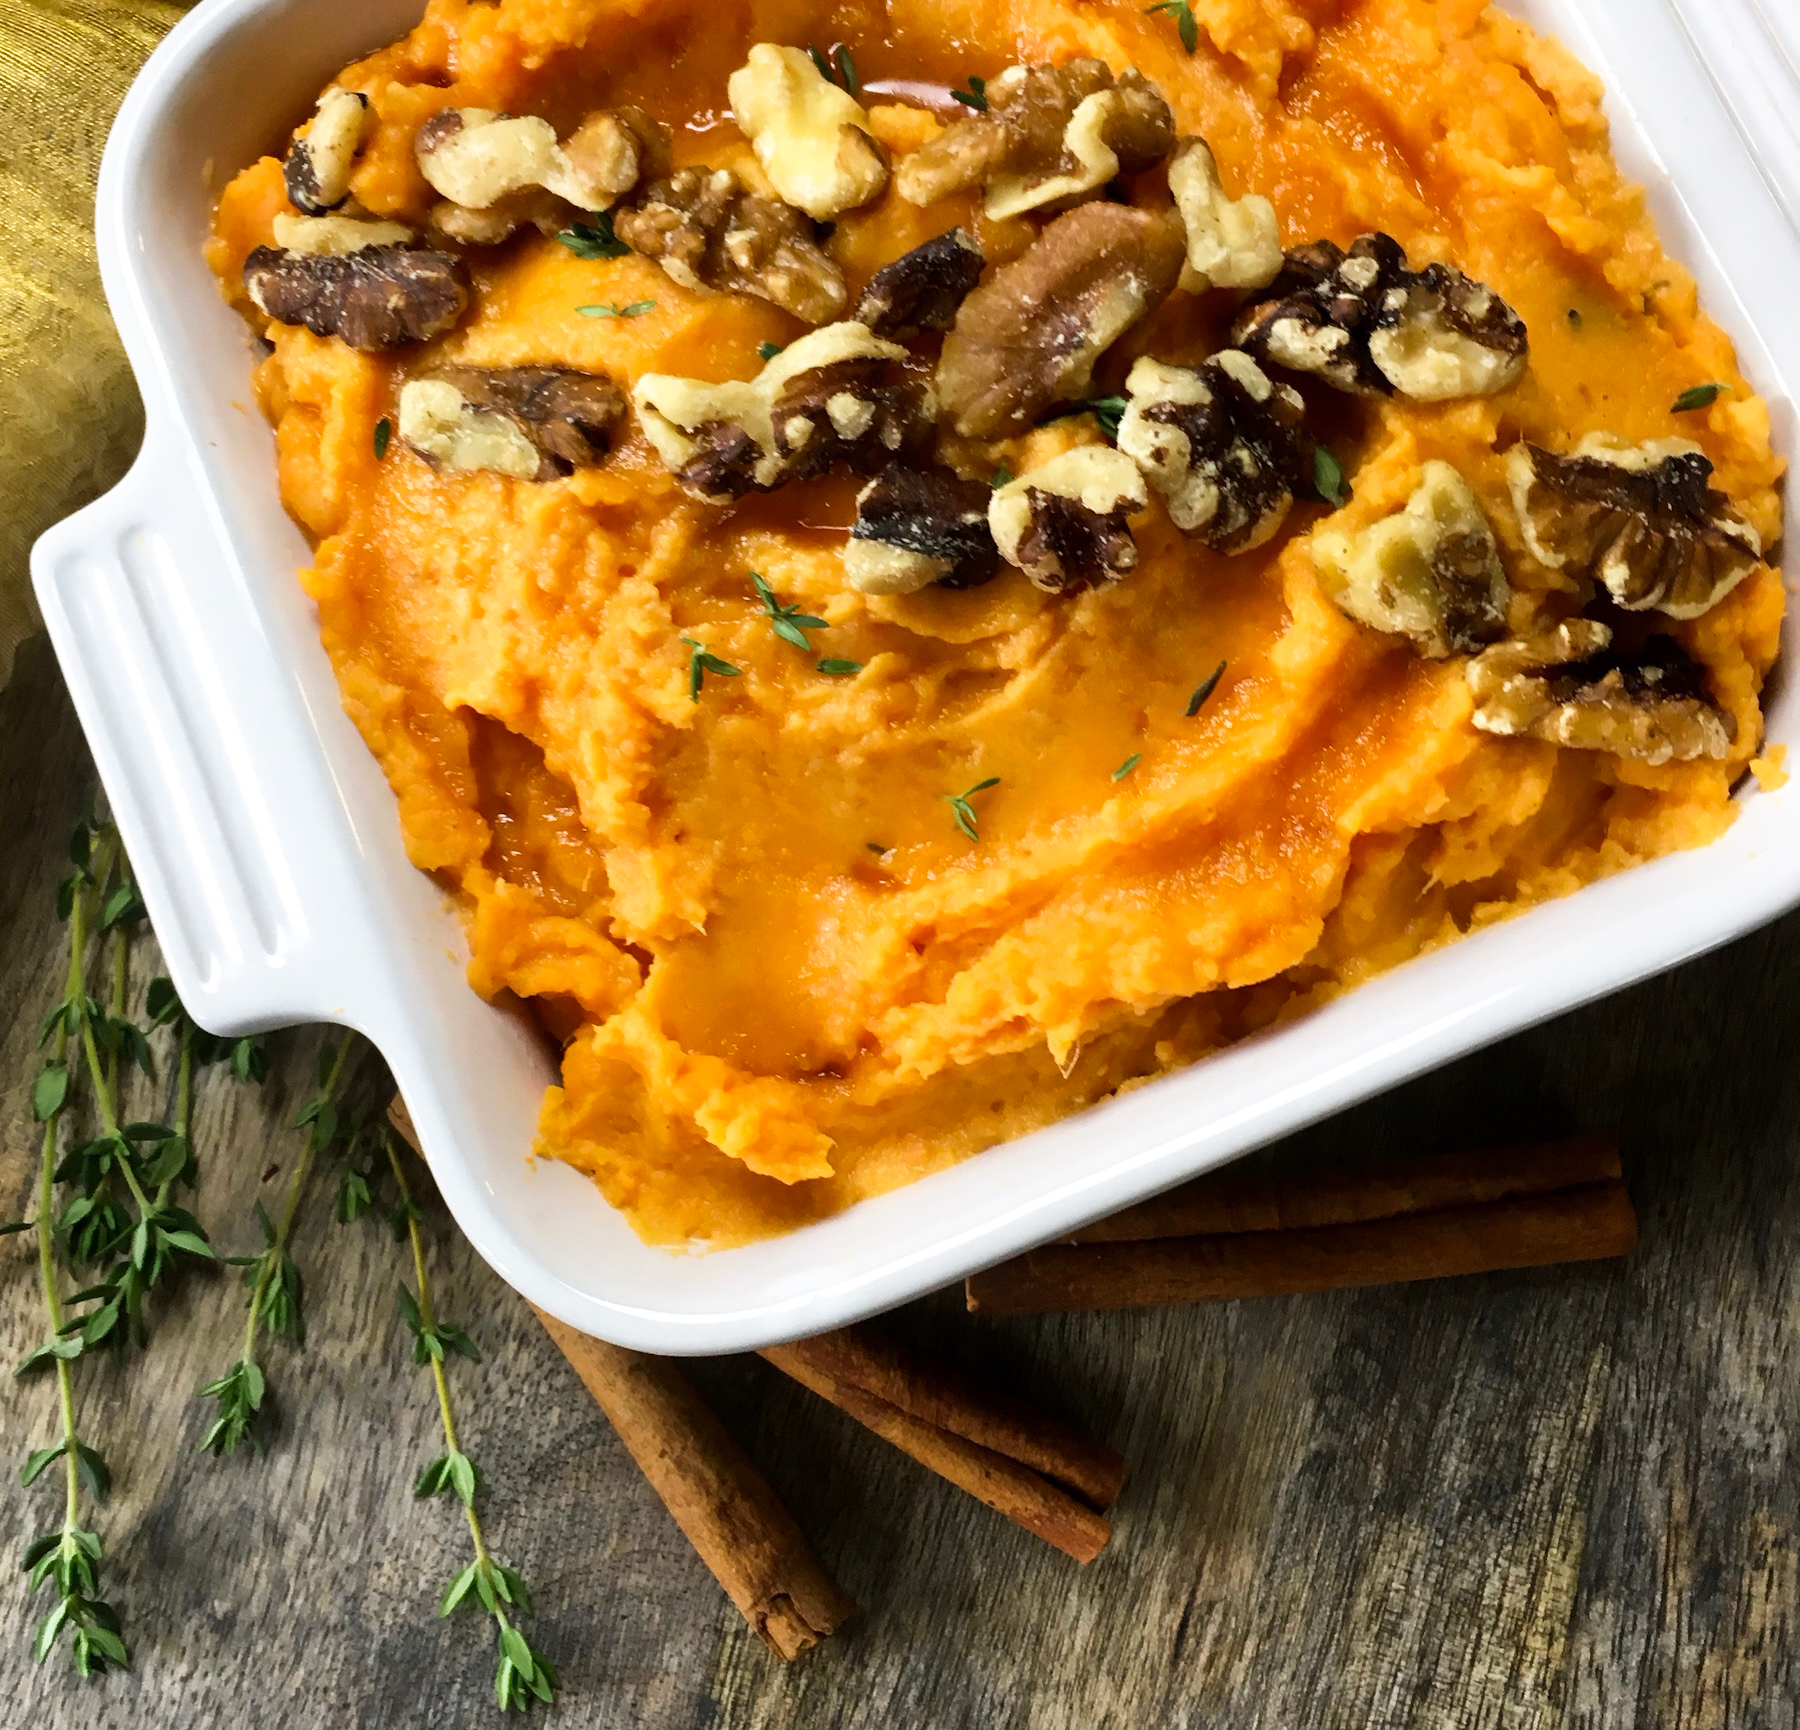 These rich and creamy mashed sweet potatoes are the perfect side dish for just about any holiday meal. However, these savory sweet potatoes so quick and easy to make, you’ll want to enjoy them throughout the year. #Thanksgiving #Christmas #Savory #SideDish